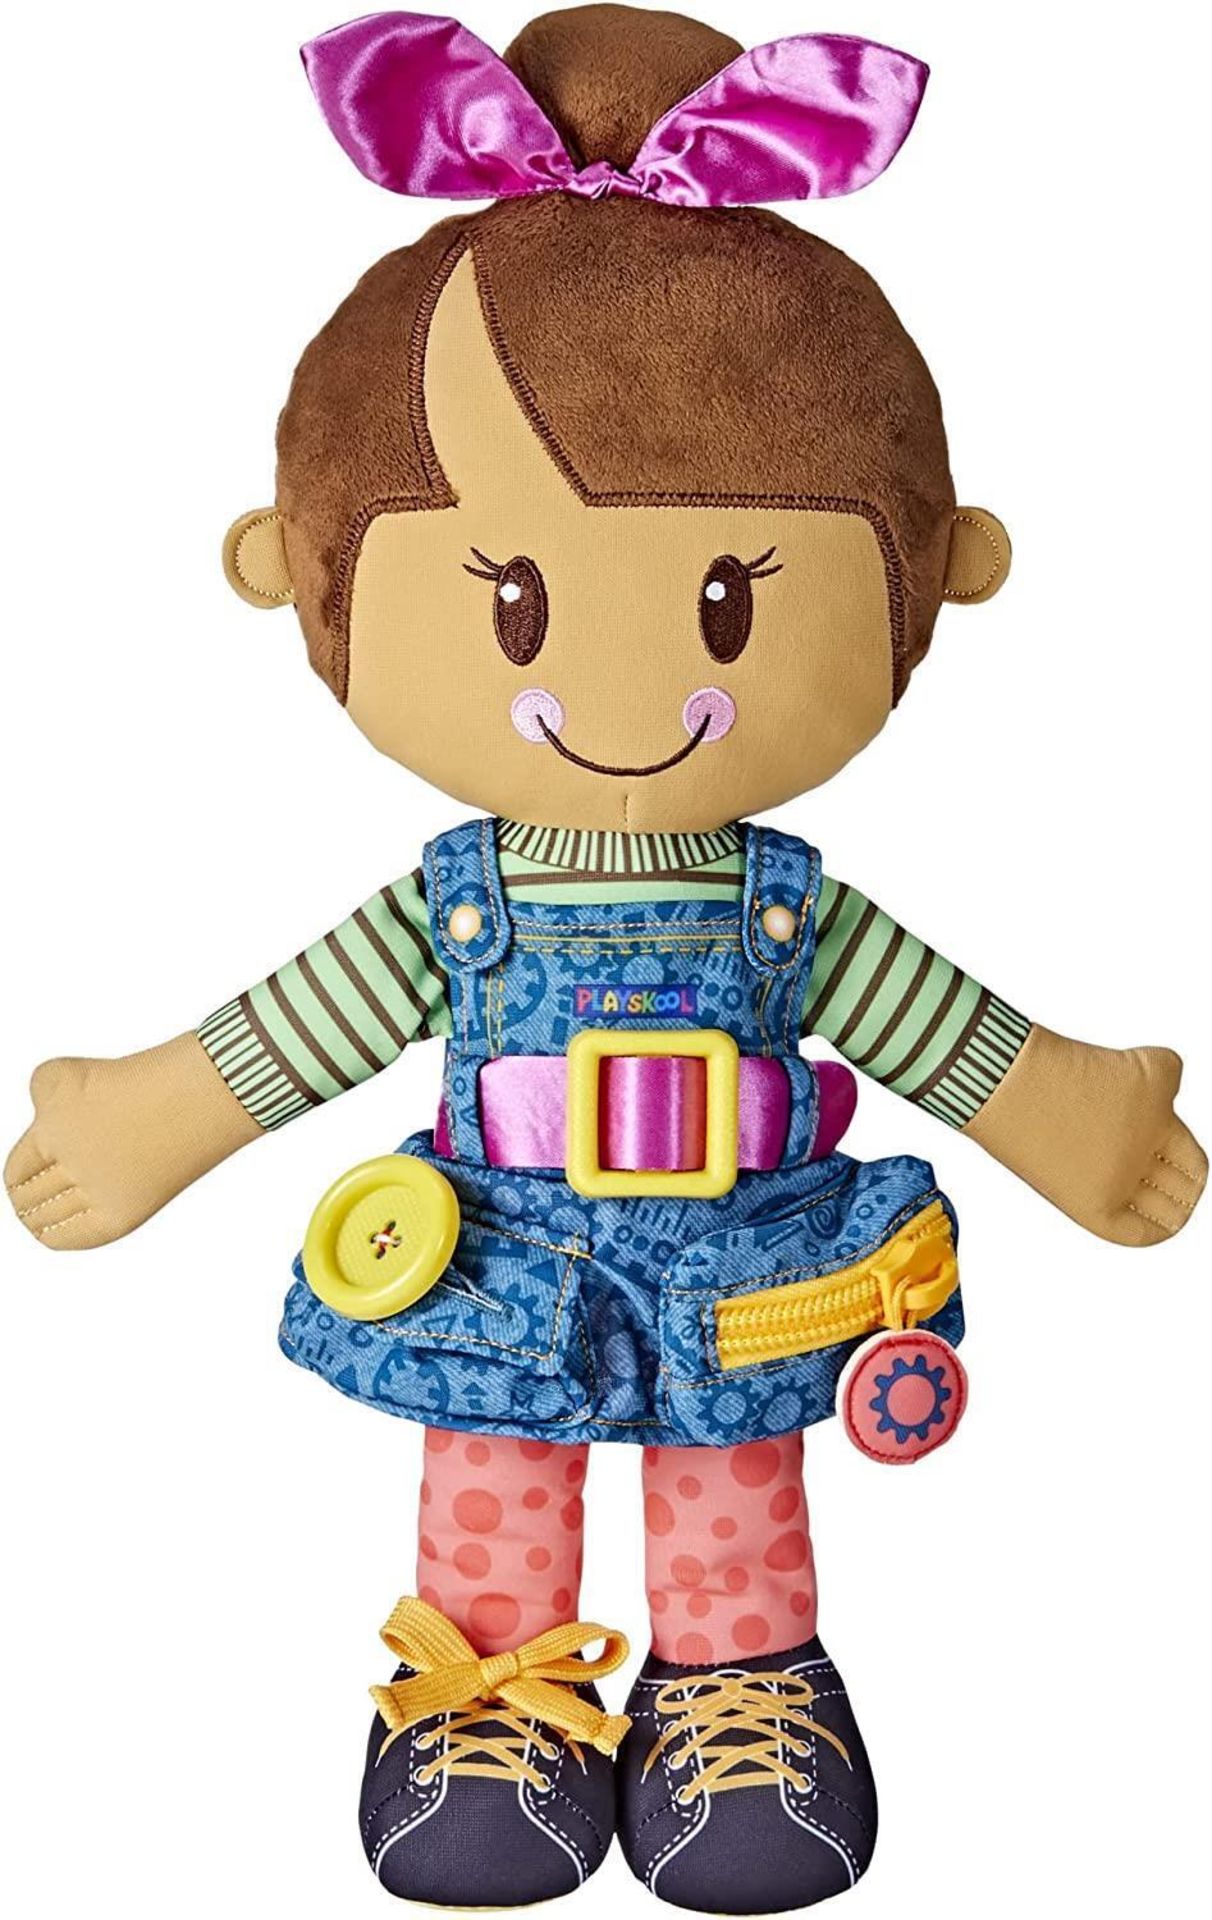 30 PCS OF PLAYSKOOL DRESSY KIDS DOLLS, MIX OF 3 STYLES, PERFECT FOR YOUNG KIDS - Image 4 of 6